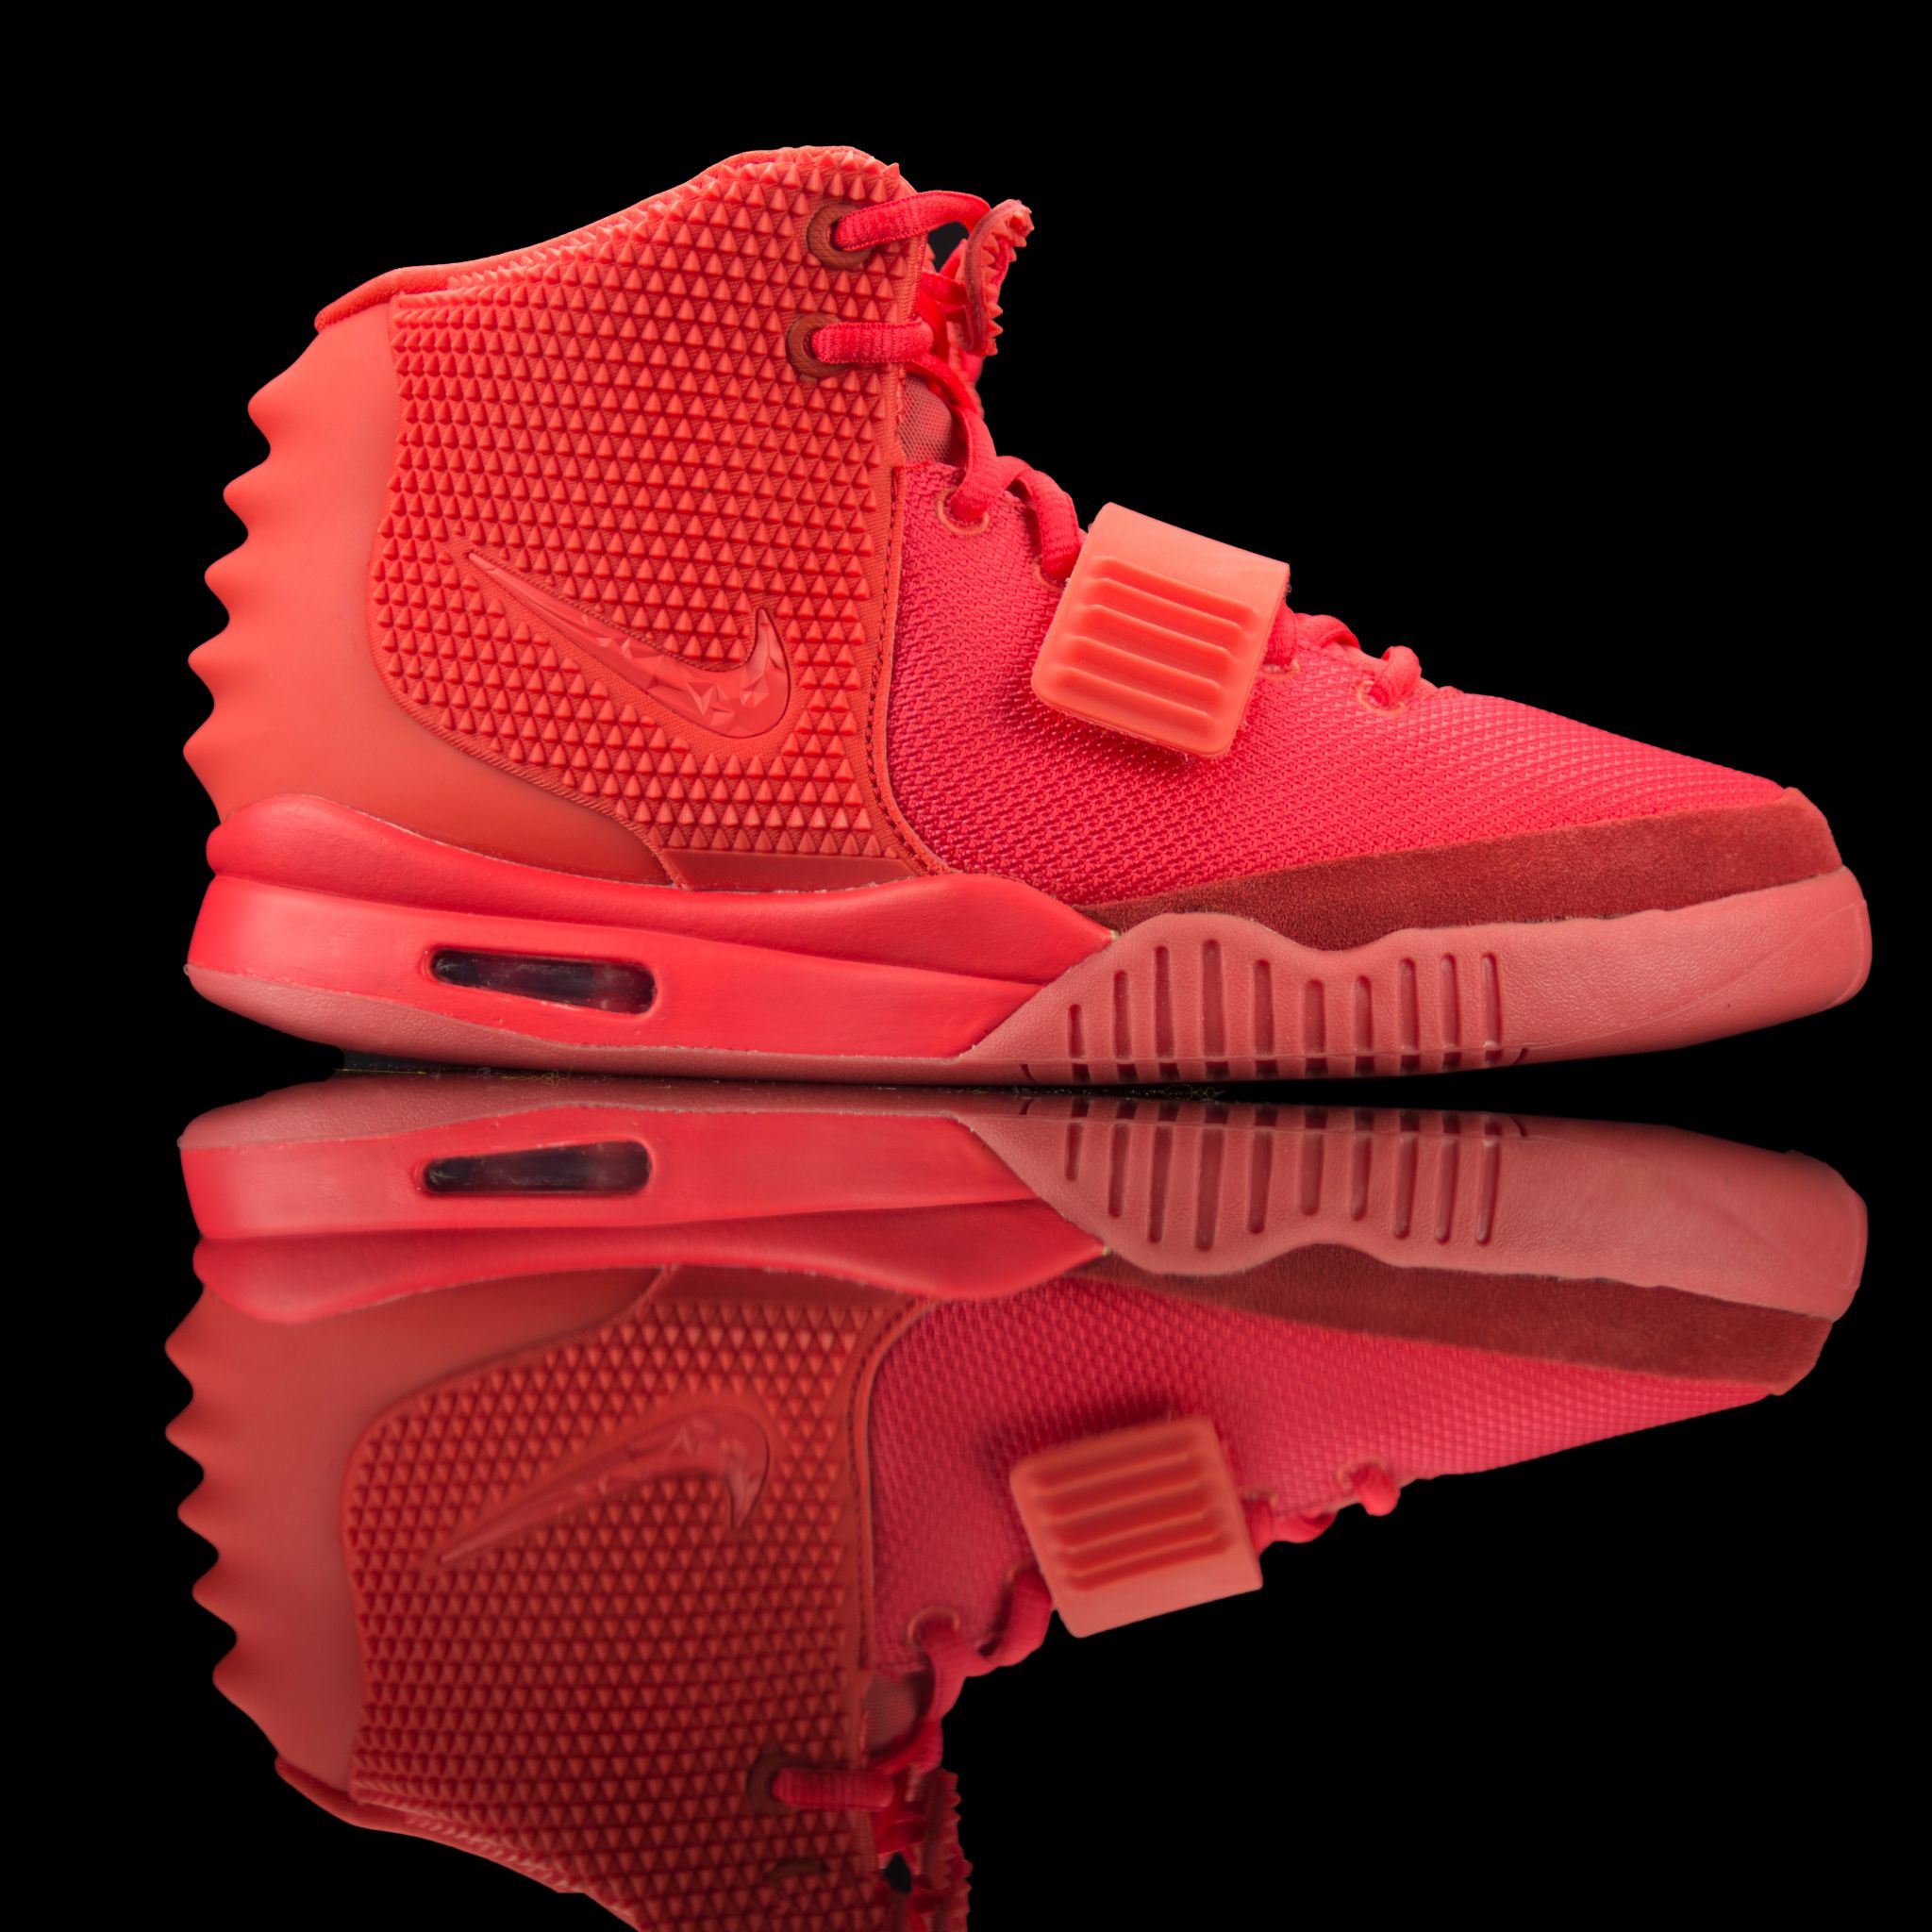 yeezy 2 red october pictures